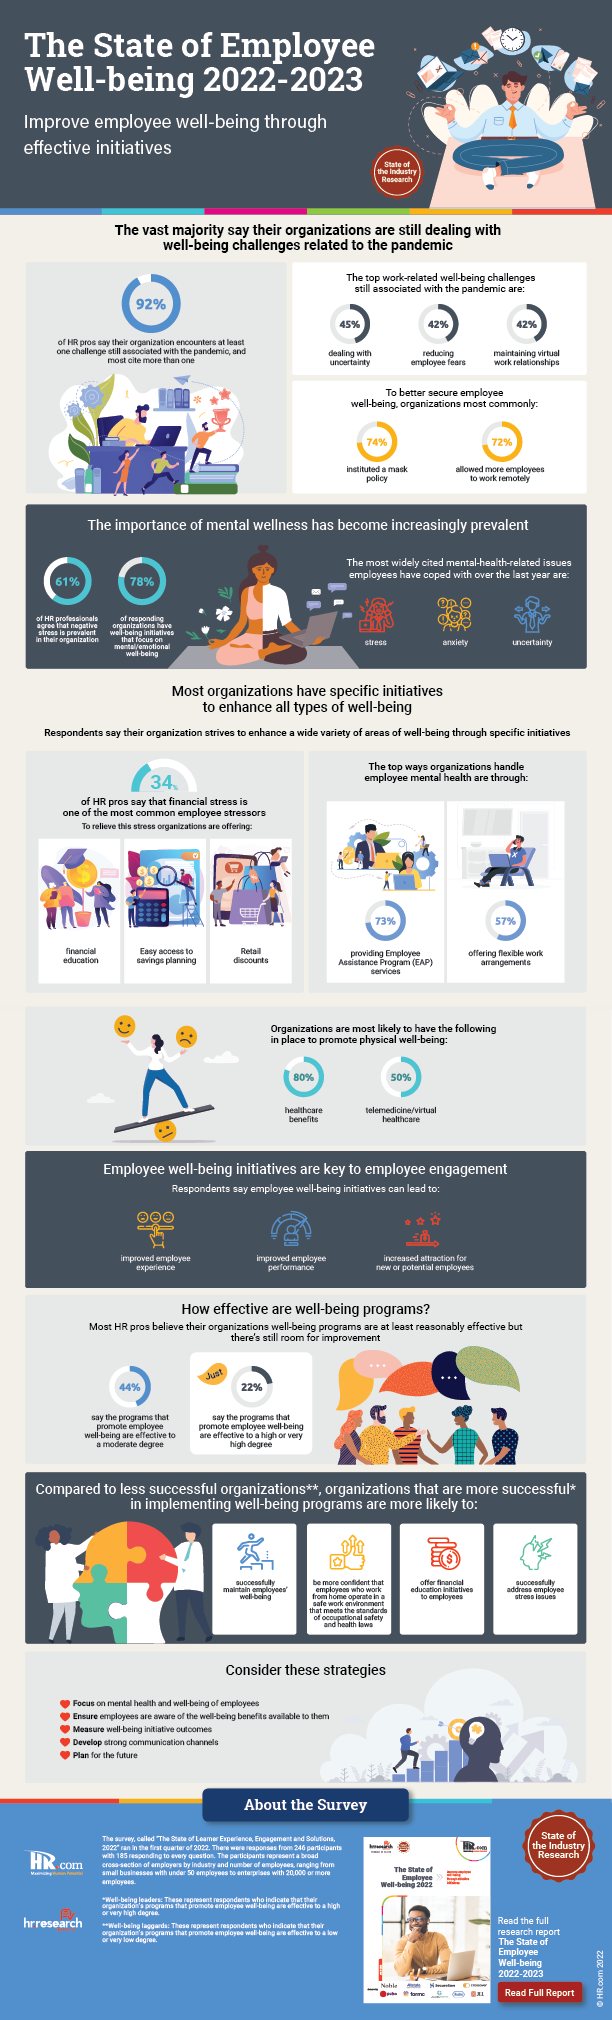 The State of Employee Wellbeing 2022